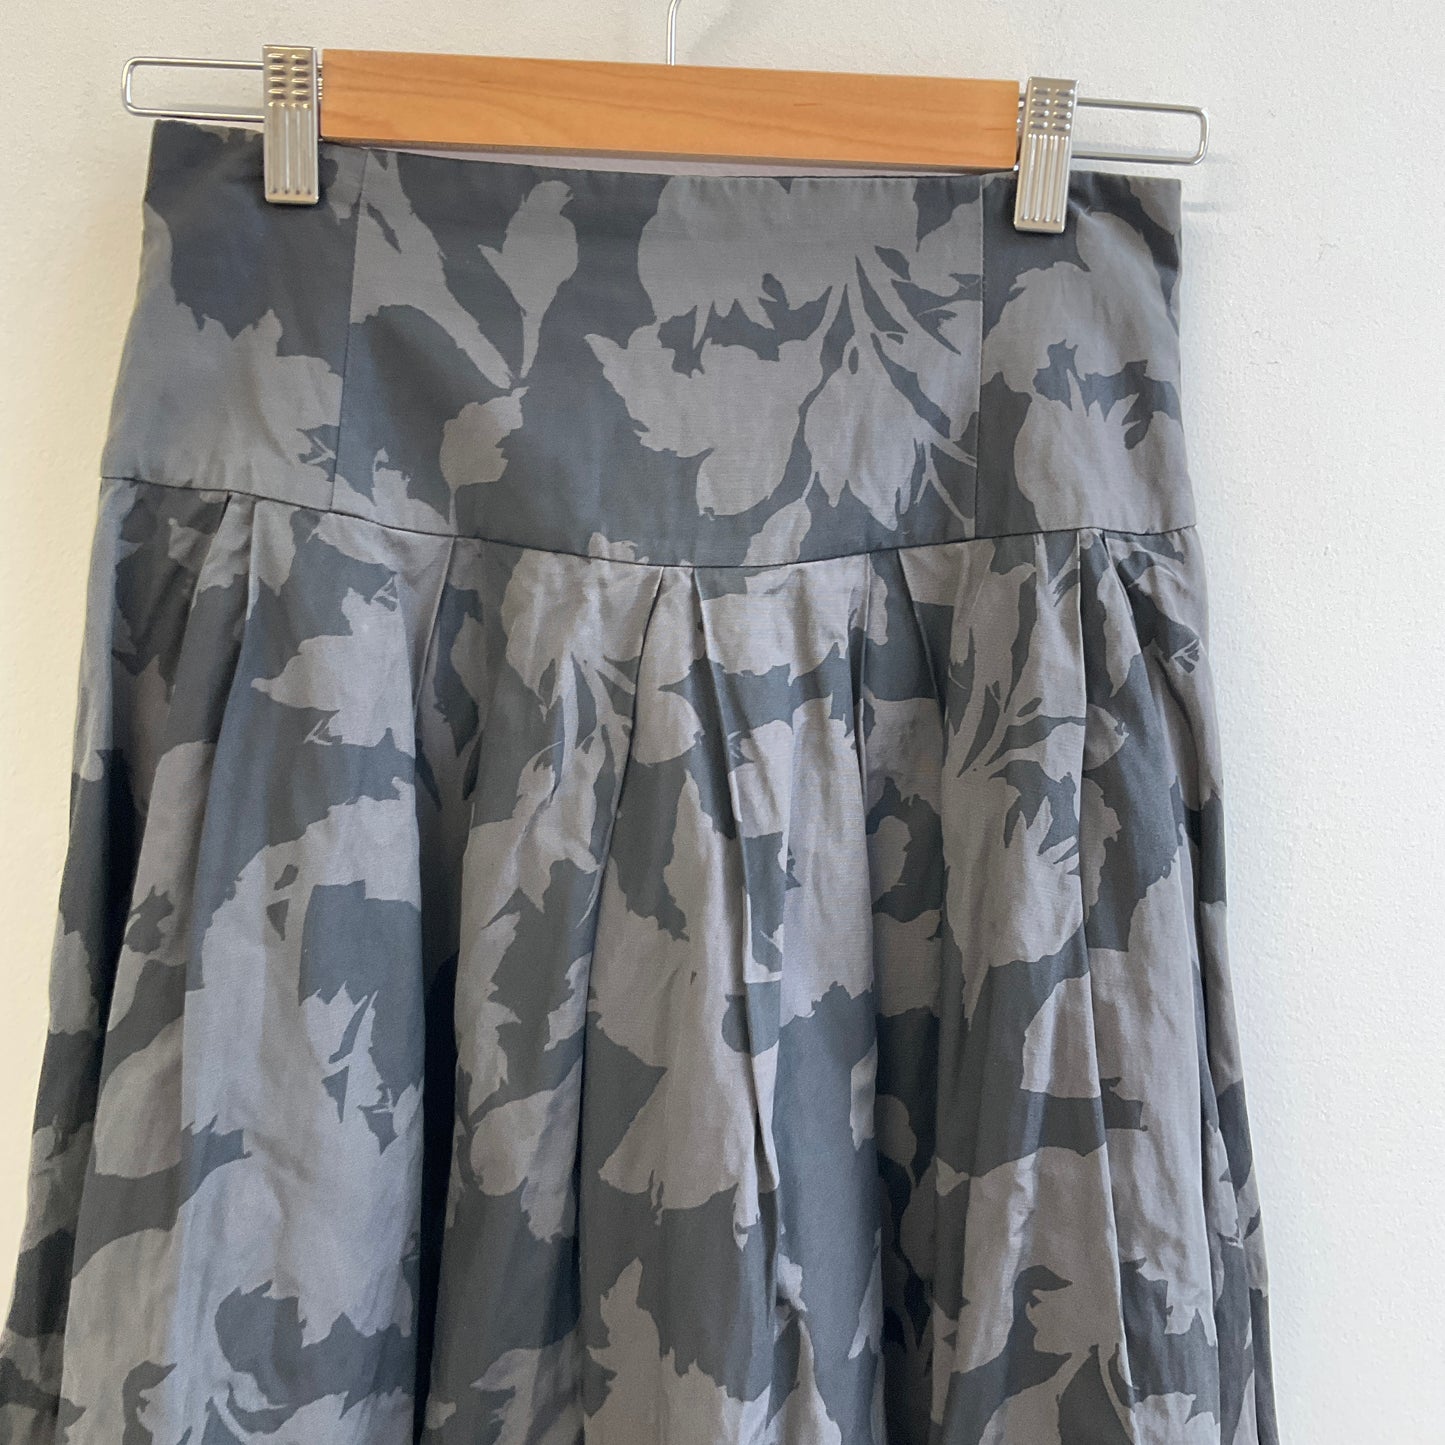 Cue - Floral Skirt